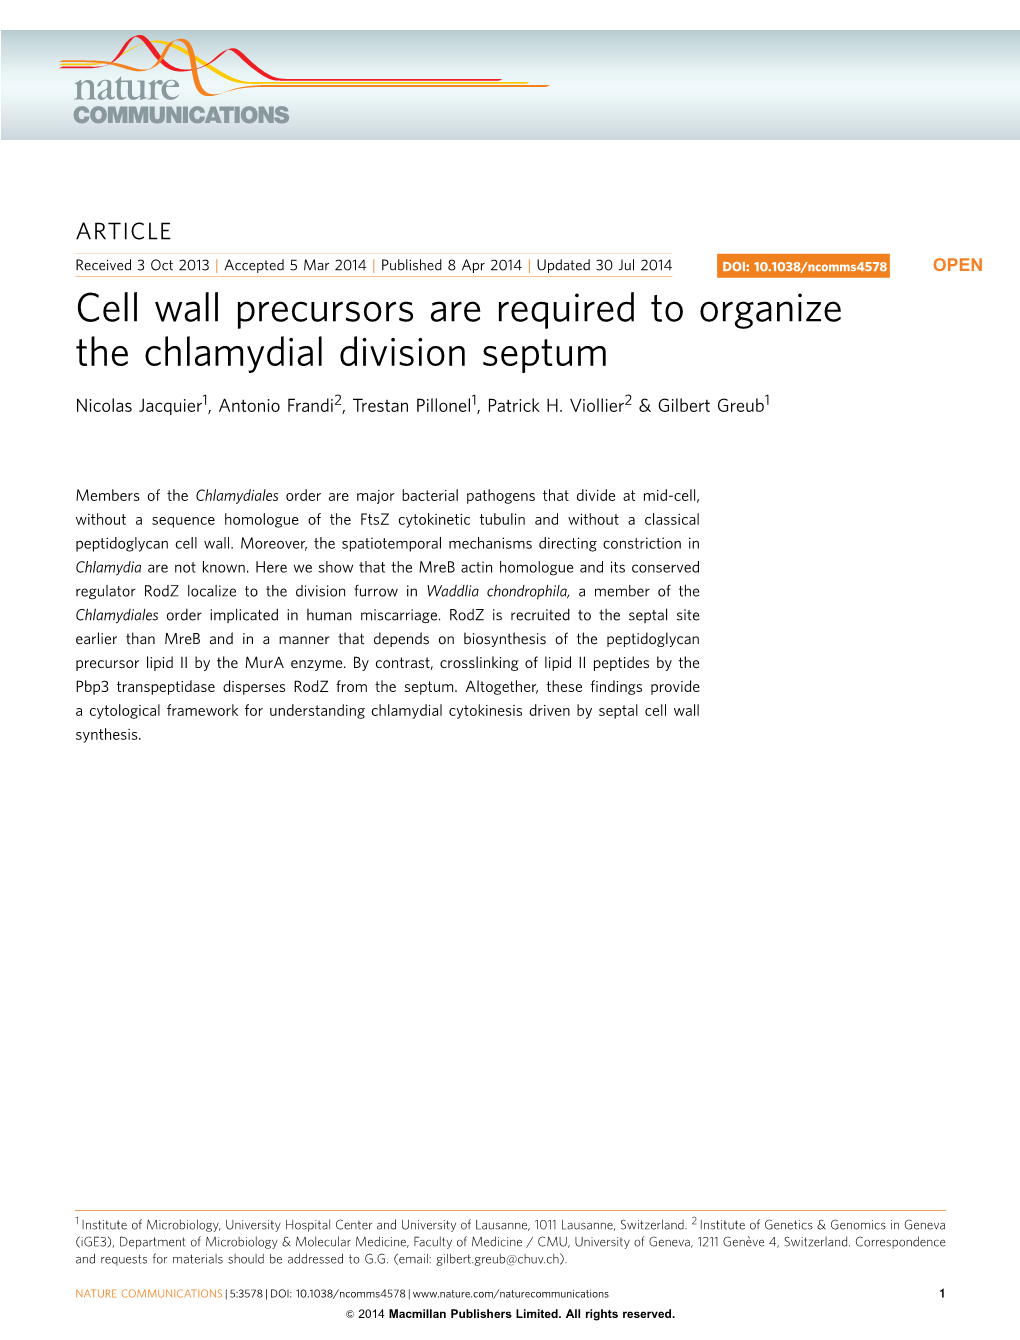 Cell Wall Precursors Are Required to Organize the Chlamydial Division Septum